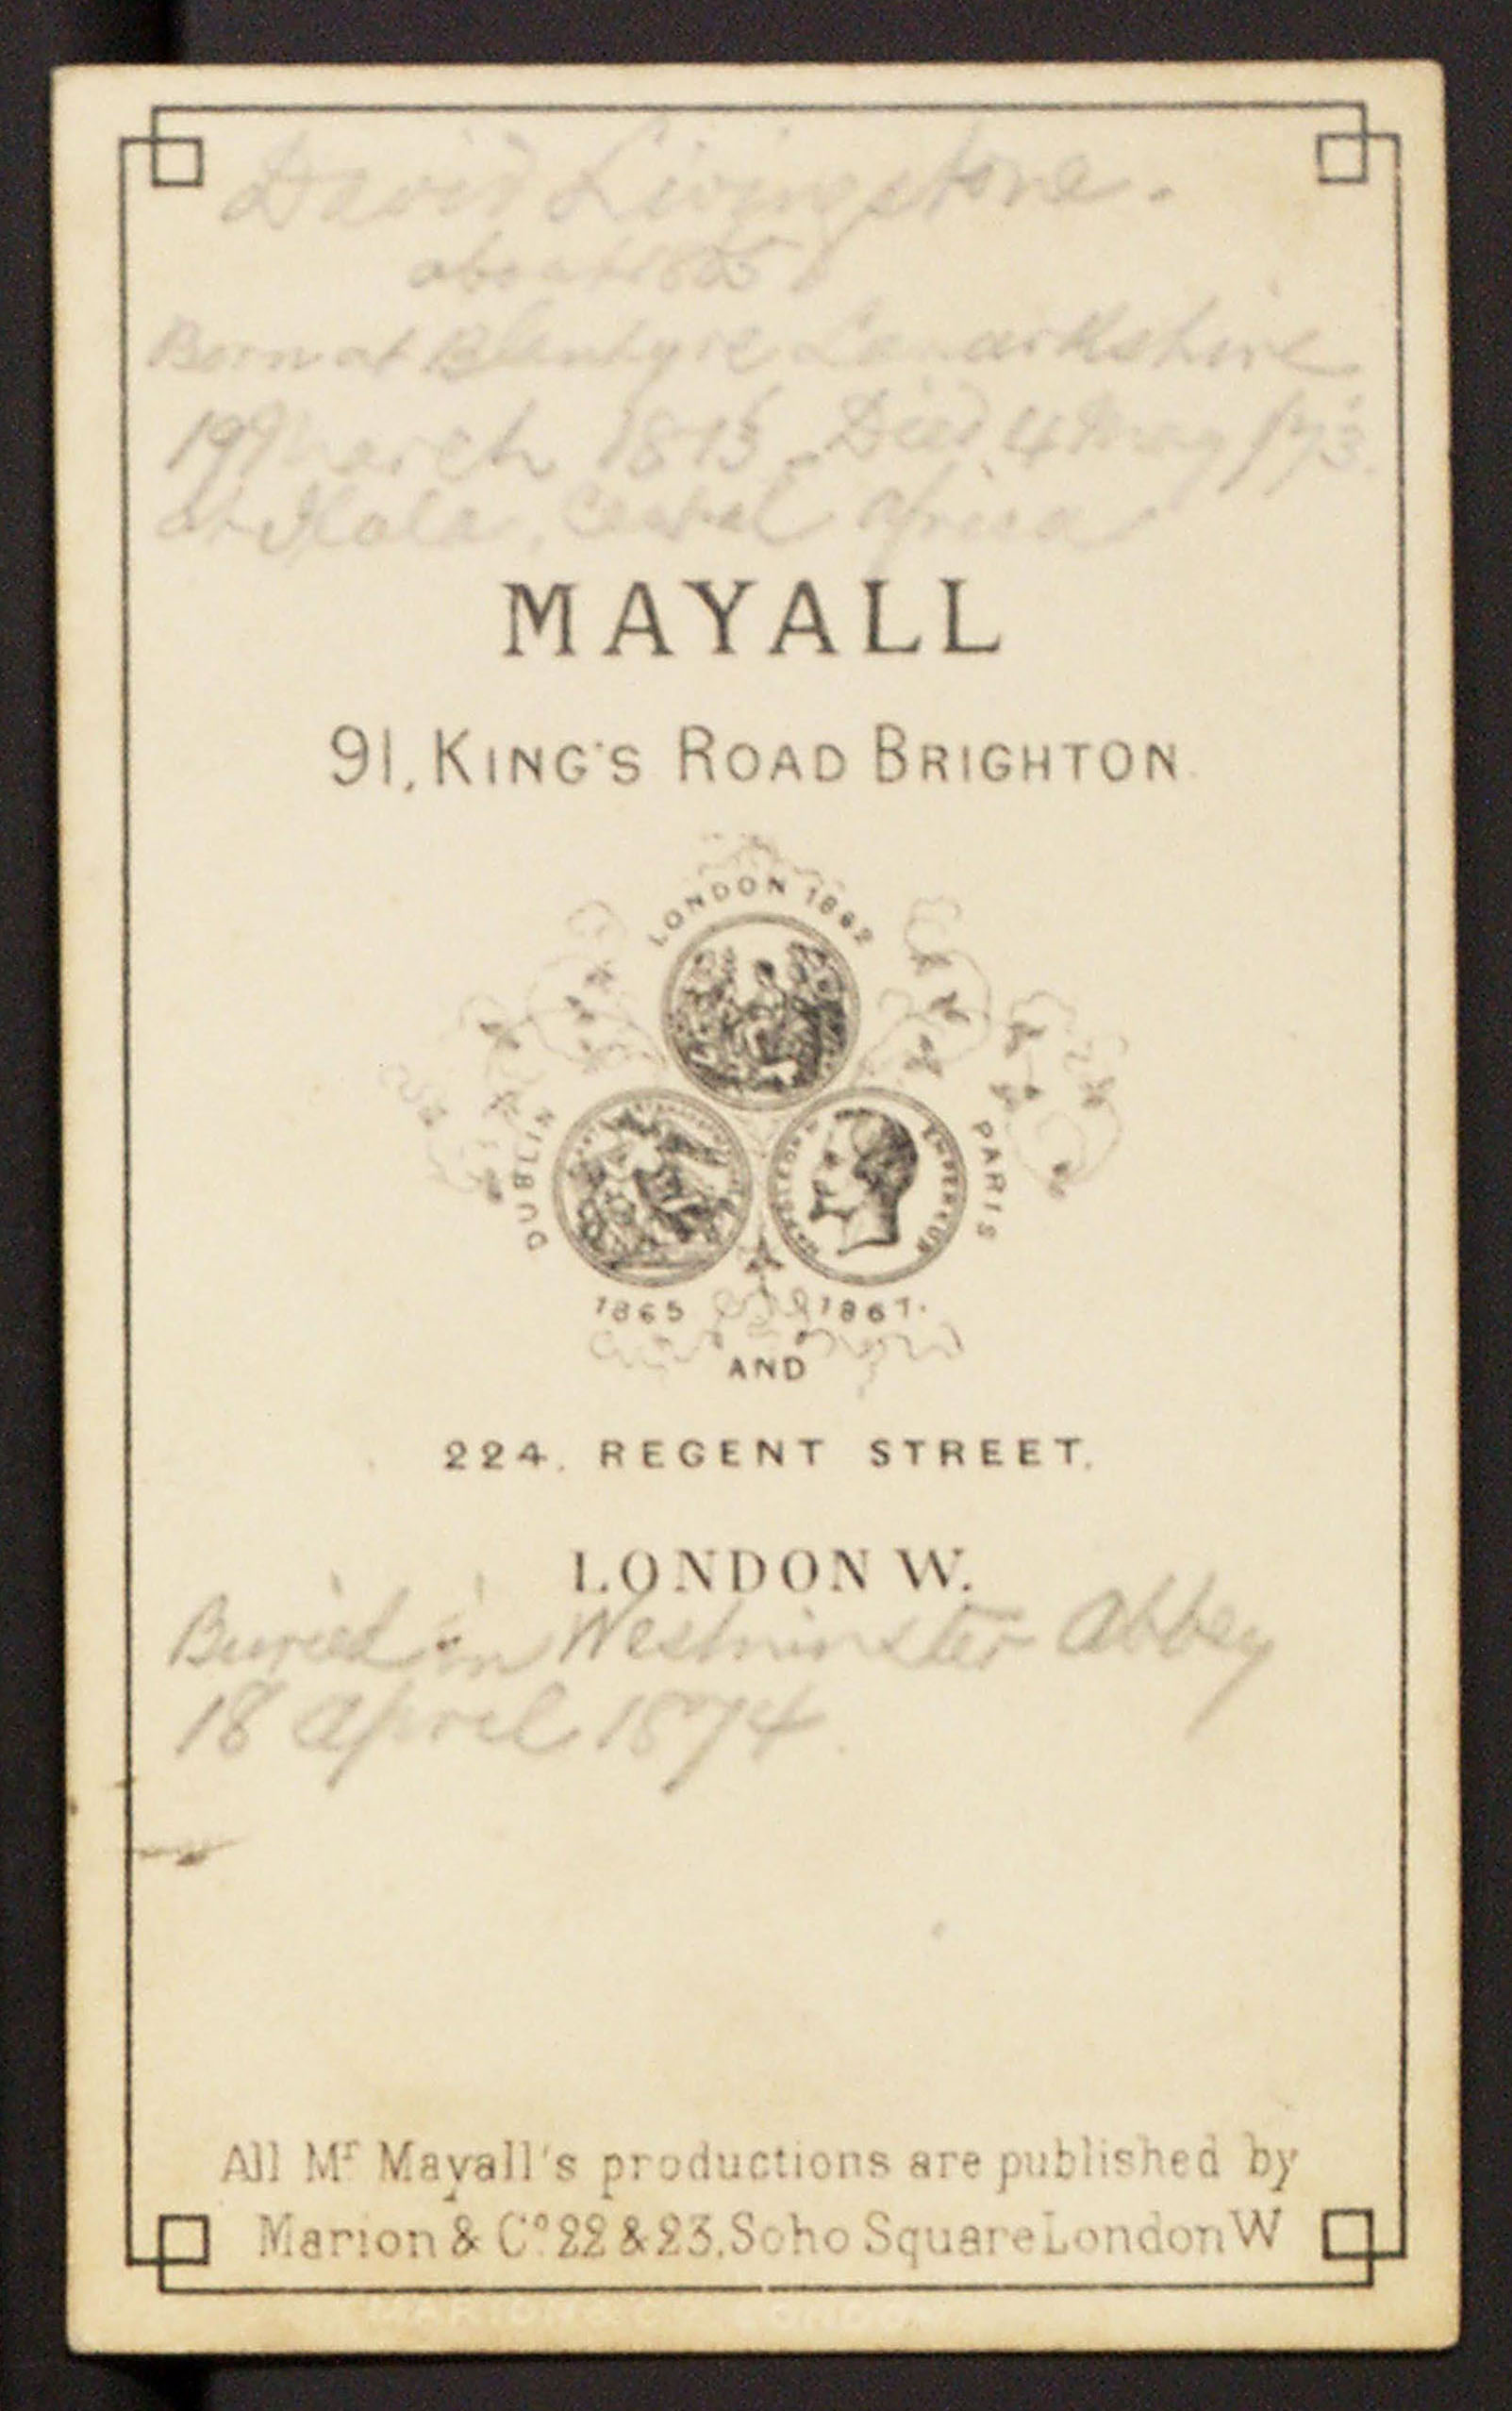 Mayall, Carte de visit with portrait of David Livingstone, date unknown (no later than 1865), verso. Images courtesy of the Smithsonian Libraries, Washington, D.C.